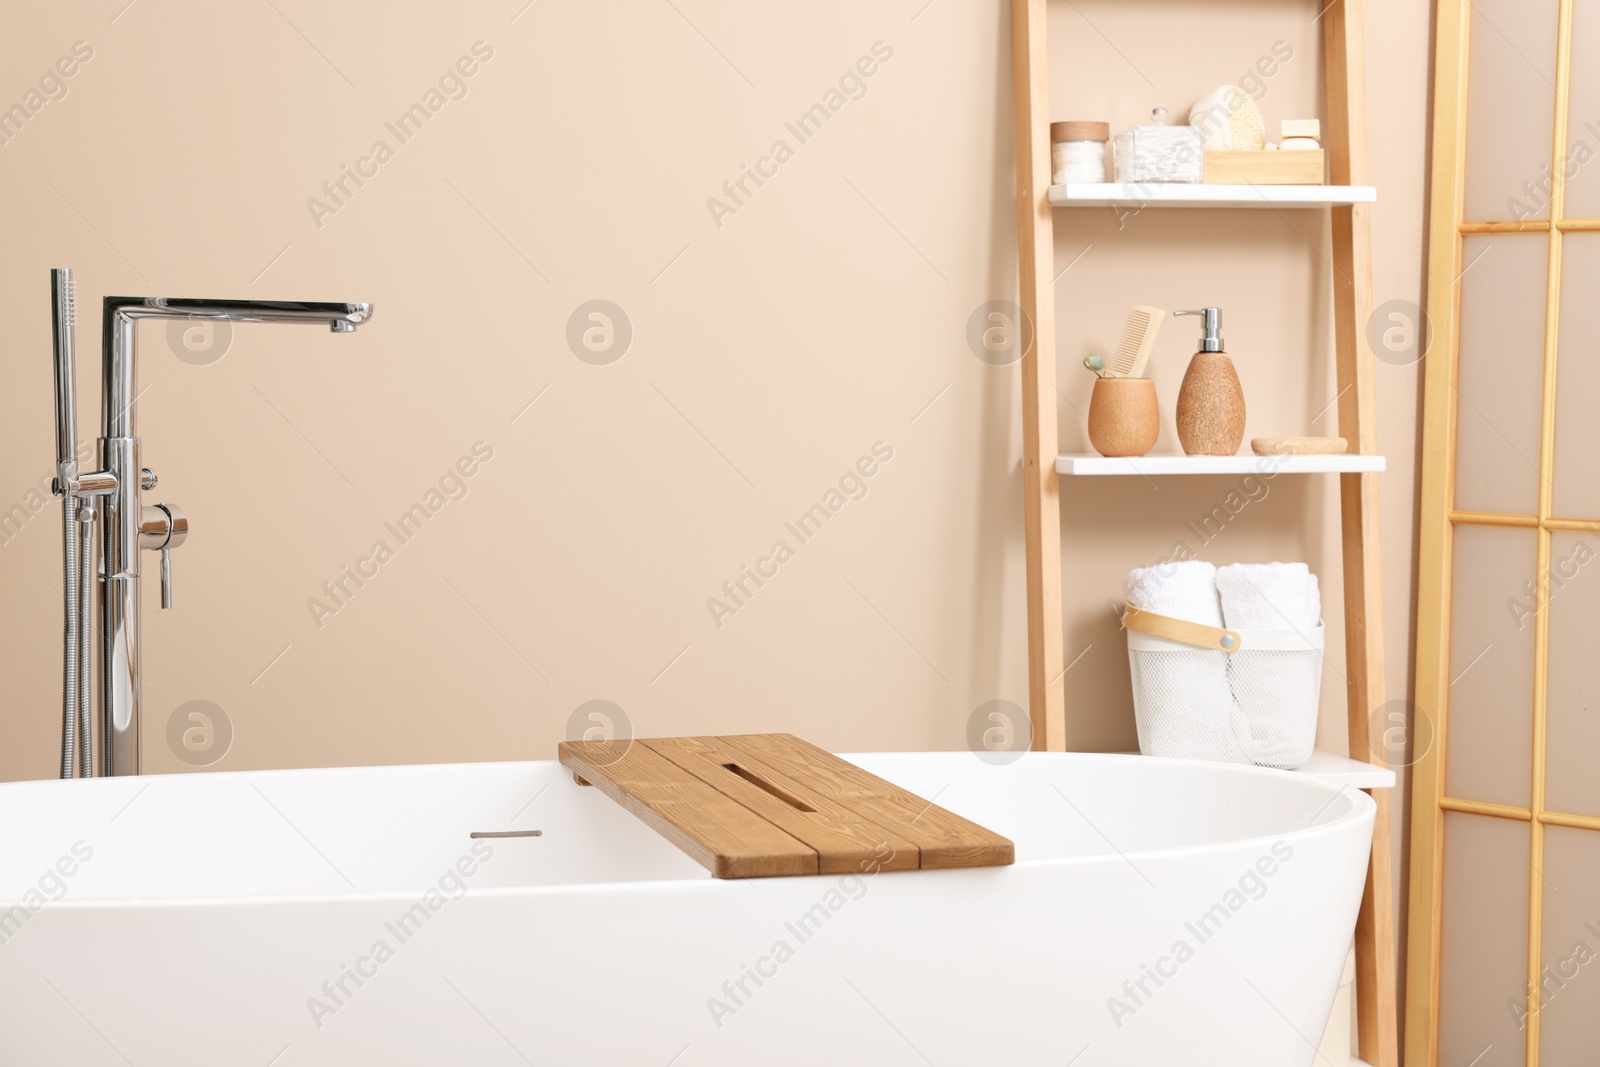 Photo of Bath tub with wooden board and different personal care products and accessories on shelving unit in bathroom